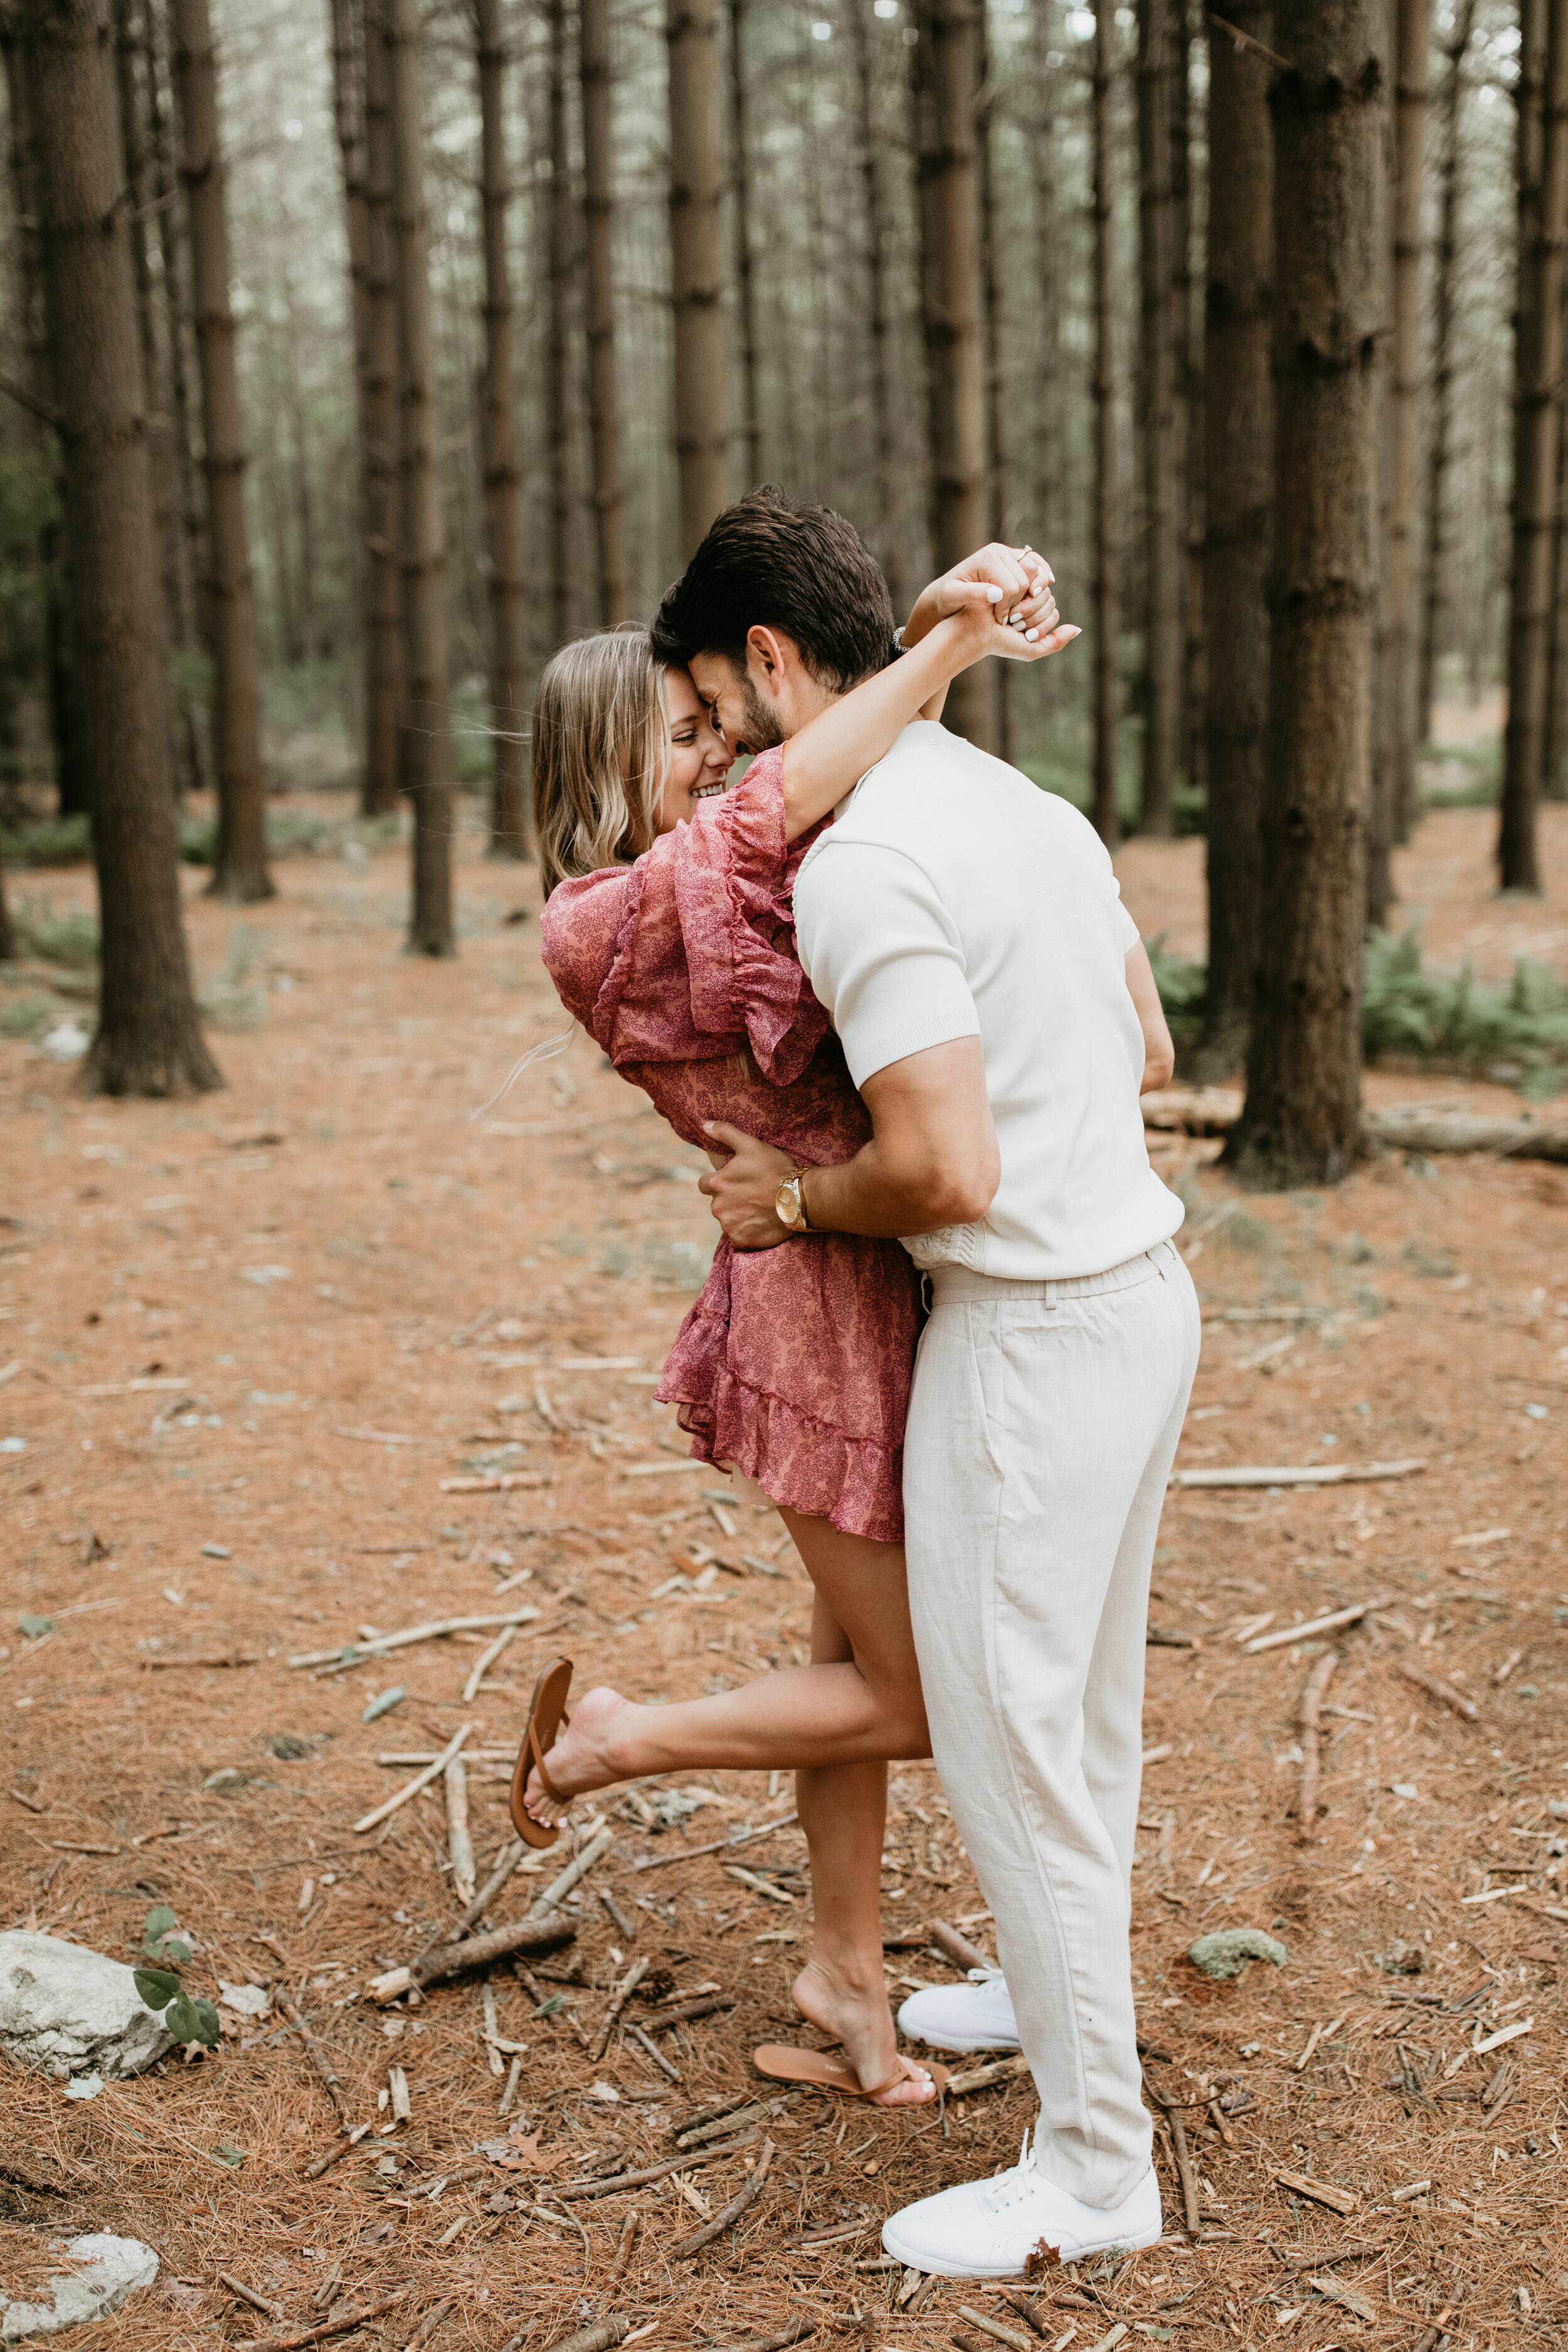 Nicole-Daacke-Photography-michaux-state-forest-elopement-adventure-engagement-session-pennsylvania-elopement-pa-elopement-photographer-gettysburg-photographer-state-park-elopement-engagement-session-pennsylvania-waterfall-104.jpg